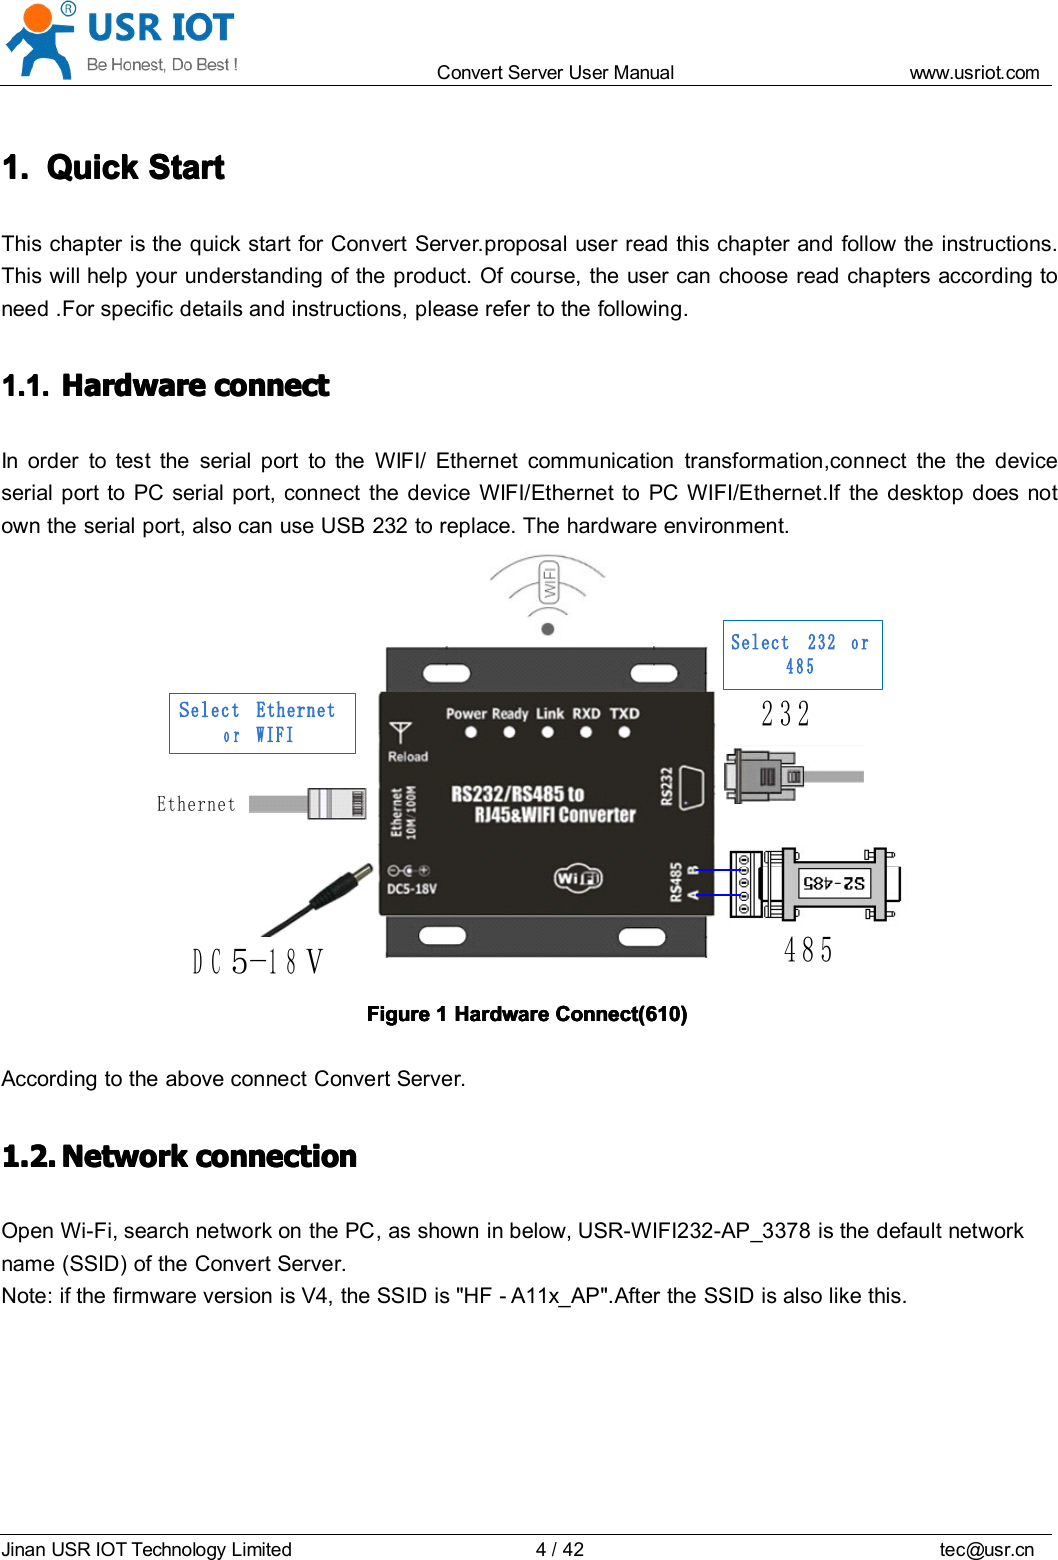 Convert Server User Manual www.usr iot.c omJinan USR IOT Technology Limited 4/42 tec@usr.cn1.1.1.1. QuickQuickQuickQuick StartStartStartStartThis chapter is the quick start for Convert Server . proposal user read this chapter and follow the instructions.This will help your understanding of the product. Of course, the user can choose read chapters according toneed . For specific details and instructions, please refer to the following.1.1.1.1.1.1.1.1. HardwareHardwareHardwareHardware connectconnectconnectconnectIn order to test the serial port to the WIFI/ Ethernet communication transformation,connect the the deviceserial port to PC serial port, connect the device WIFI/Ethernet to PC WIFI/Ethernet .If the desktop does notown the serial port, also can use USB 232 to replace. The hardware environment.EthernetDC5 -18V232485Select EthernetorWIFISelect 232 or 485FigureFigureFigureFigure 1111 HardwareHardwareHardwareHardware Connect(610)Connect(610)Connect(610)Connect(610)According to the above connect Convert Server.1.2.1.2.1.2.1.2. NetworkNetworkNetworkNetwork connectionconnectionconnectionconnectionOpen Wi-Fi, search network on the PC , as shown in below, USR-WIFI232- AP_3378 is the default networkname (SSID) of the Convert Server .Note: if the firmware version is V4, the SSID is &quot;HF - A11x_AP&quot;.After the SSID is also like this.